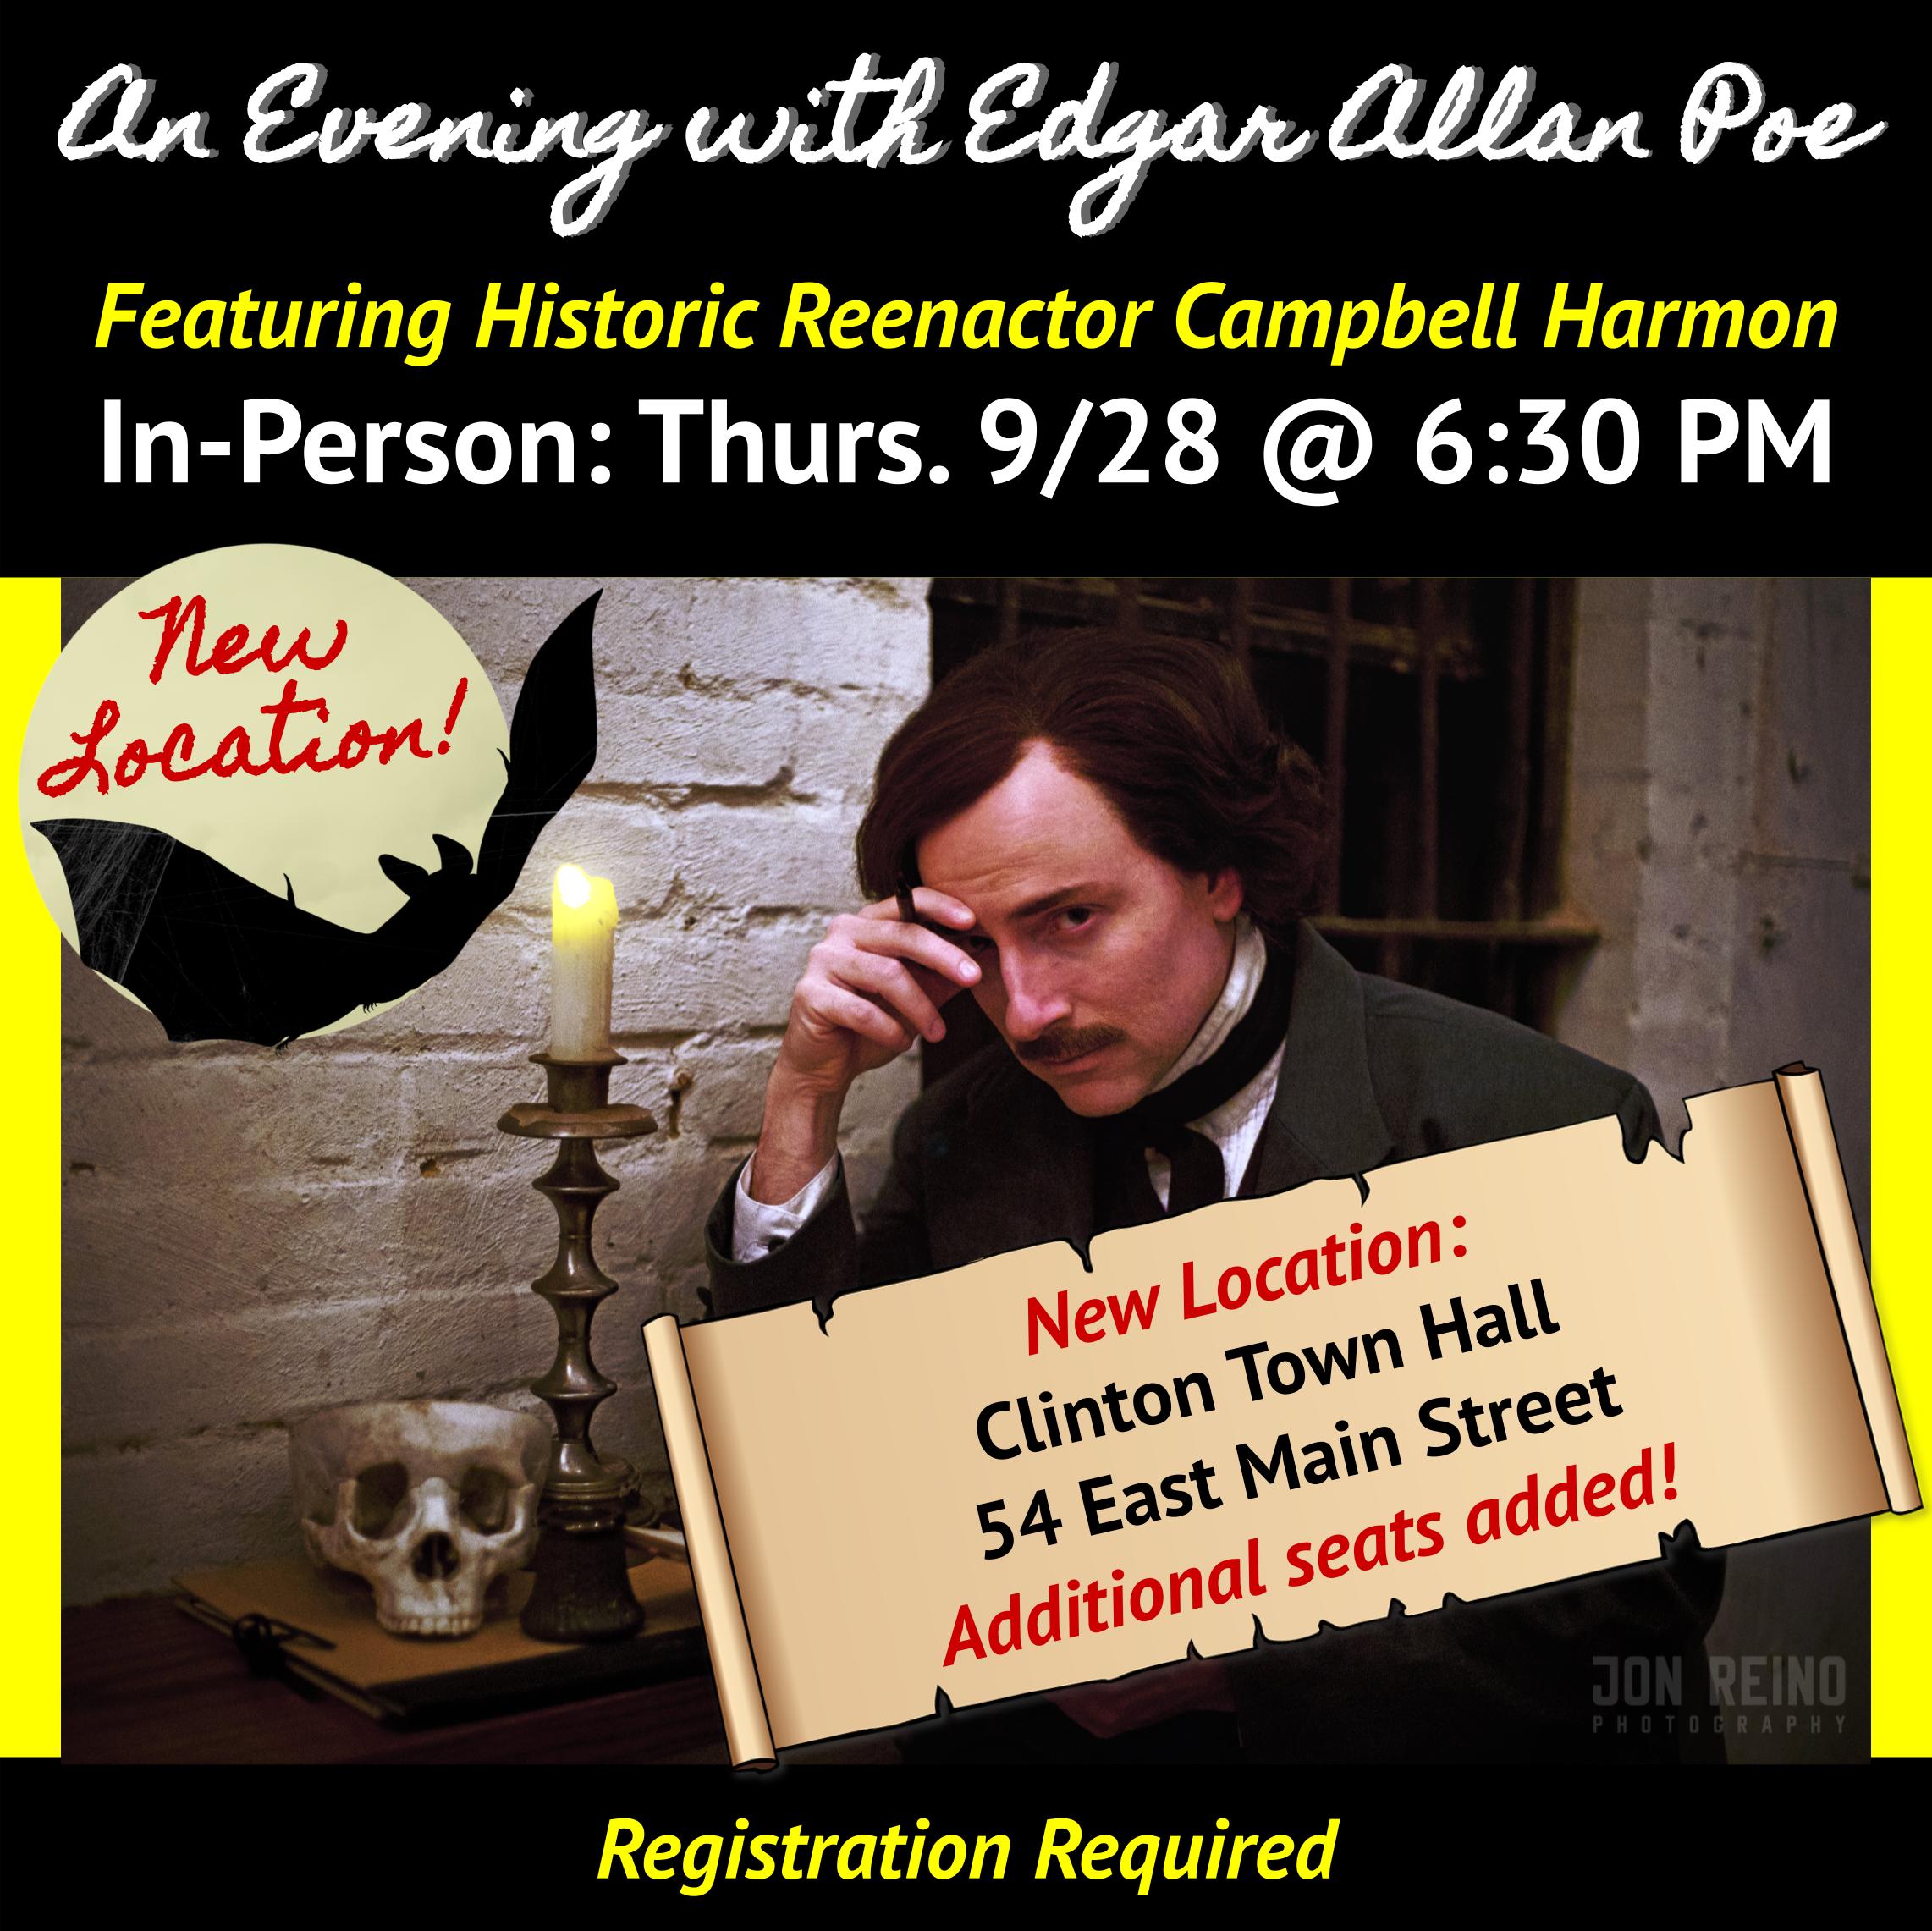 New Location: An Evening with Edgar Allan Poe